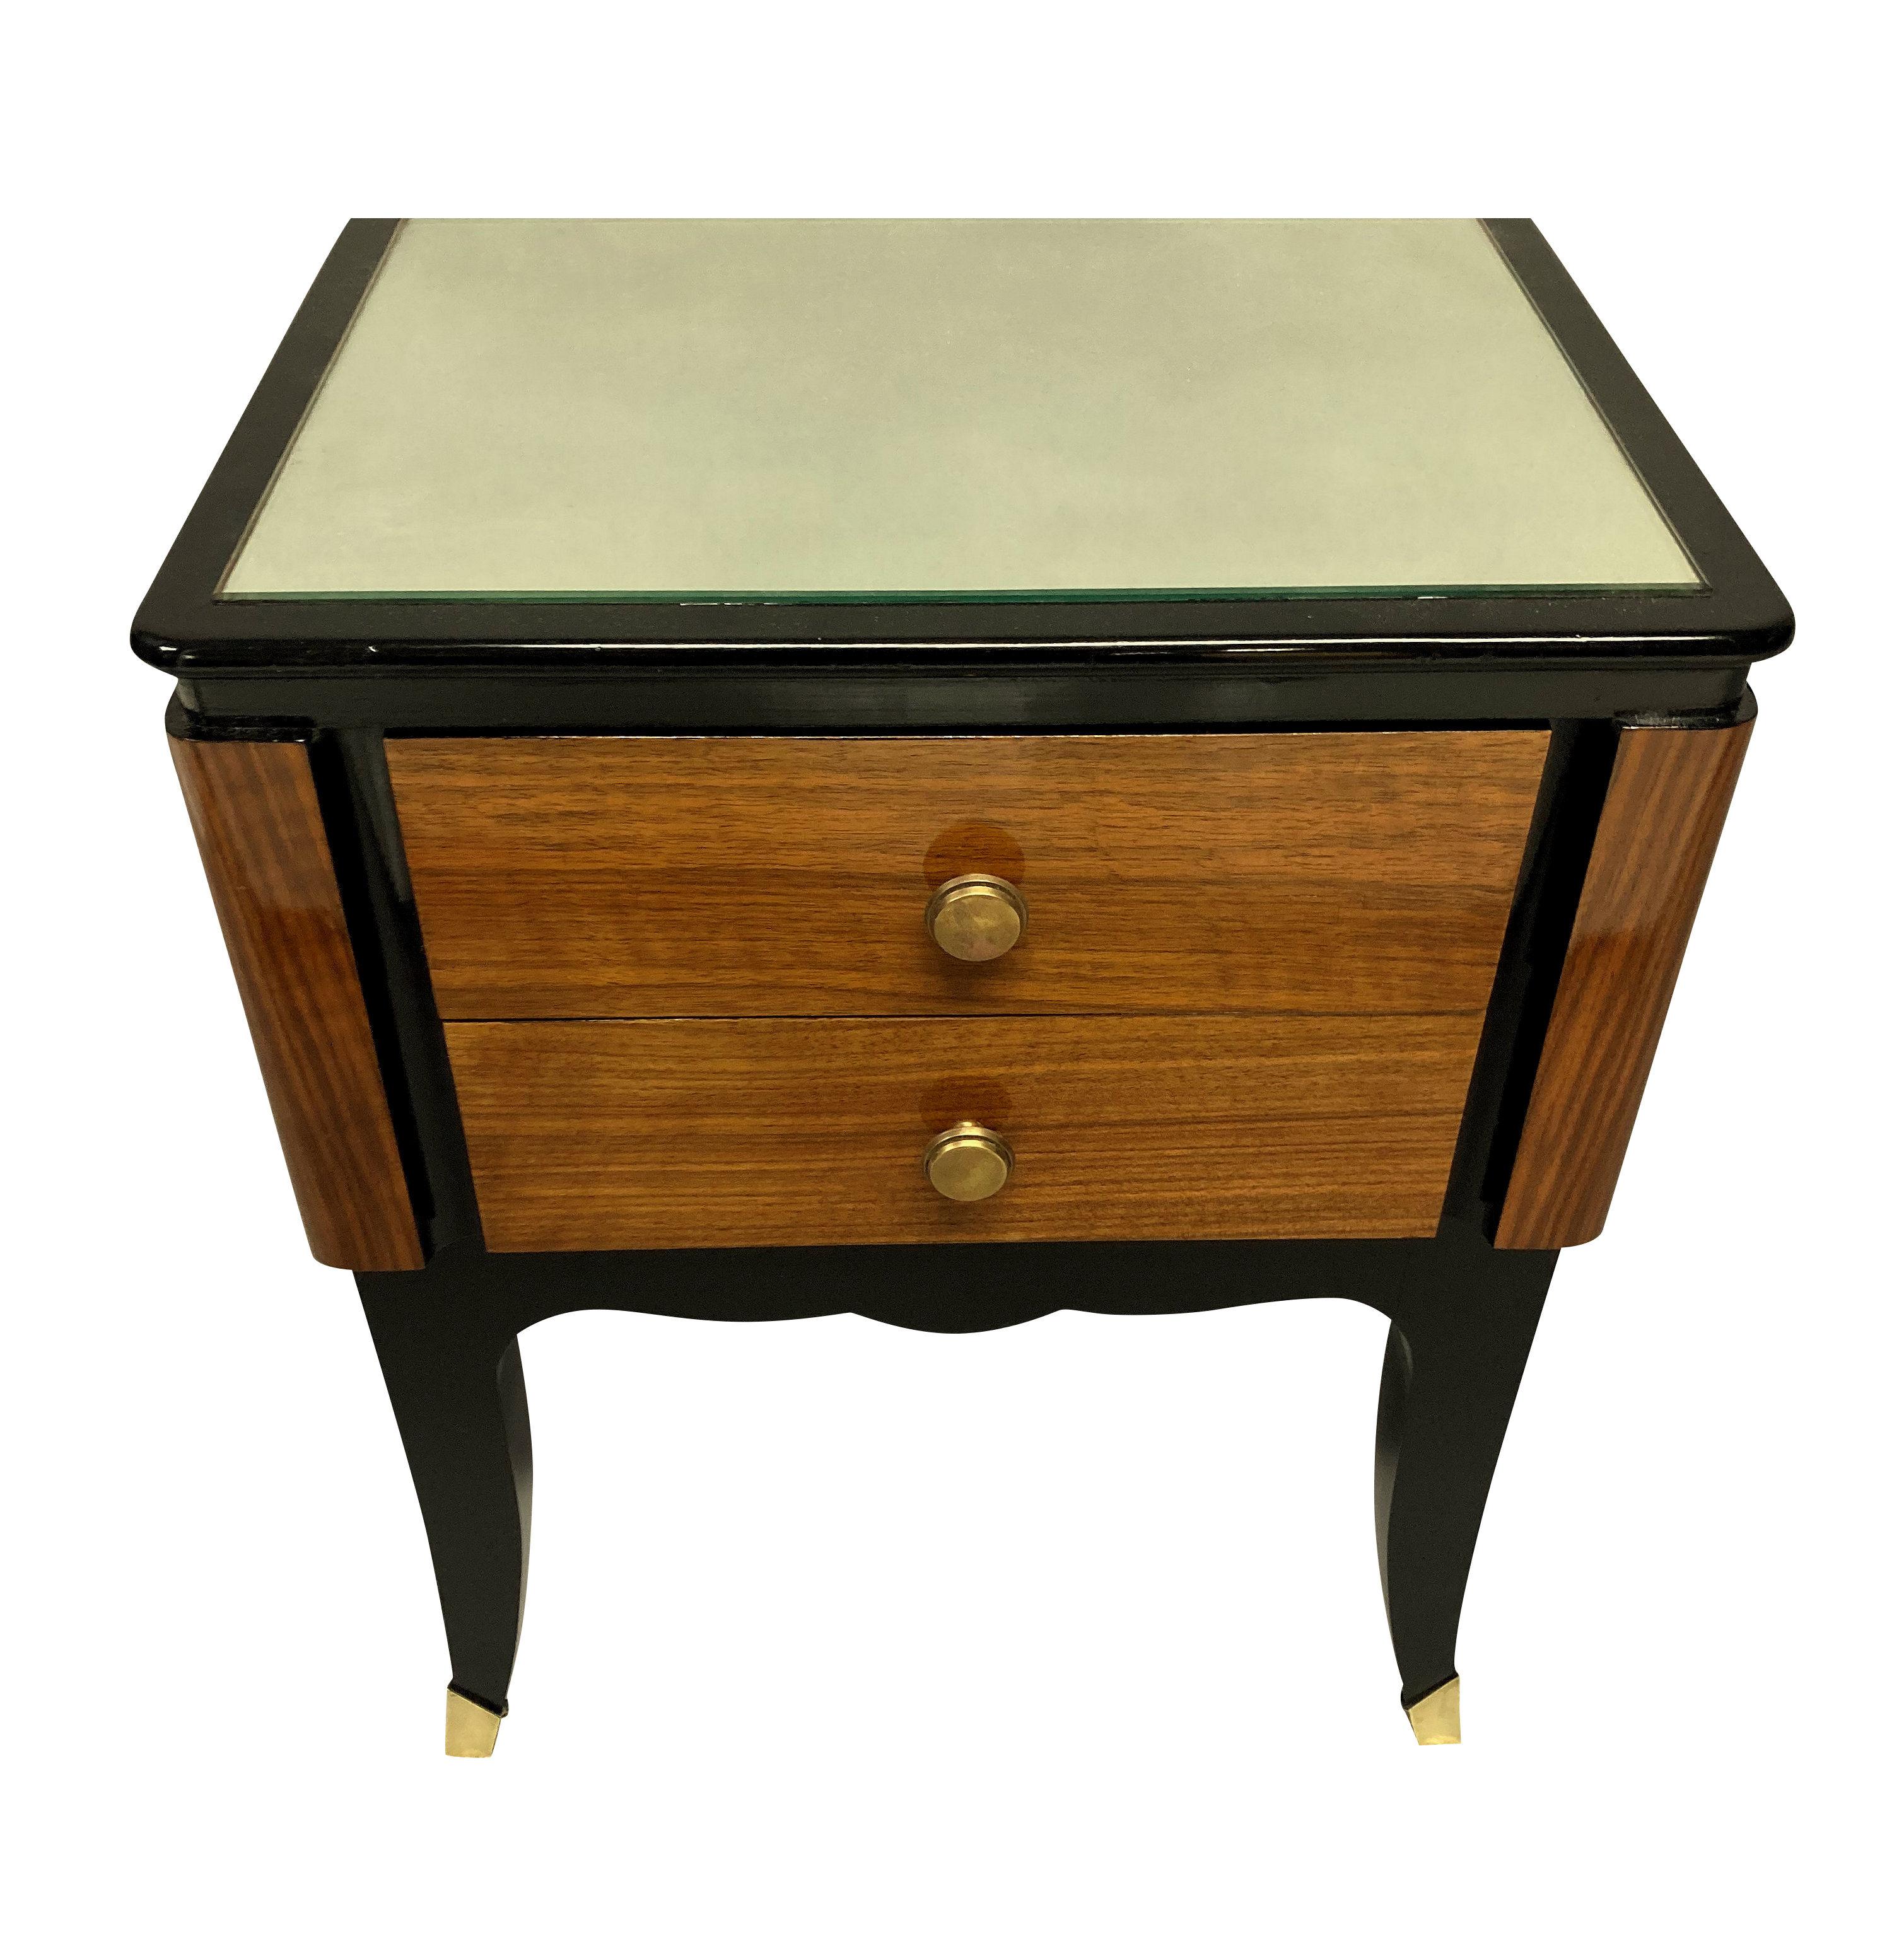 A pair of French midcentury night stands of good quality in Wood with ebonised detail. With two drawers each, brass sabot feet and antiqued mirror glass tops.